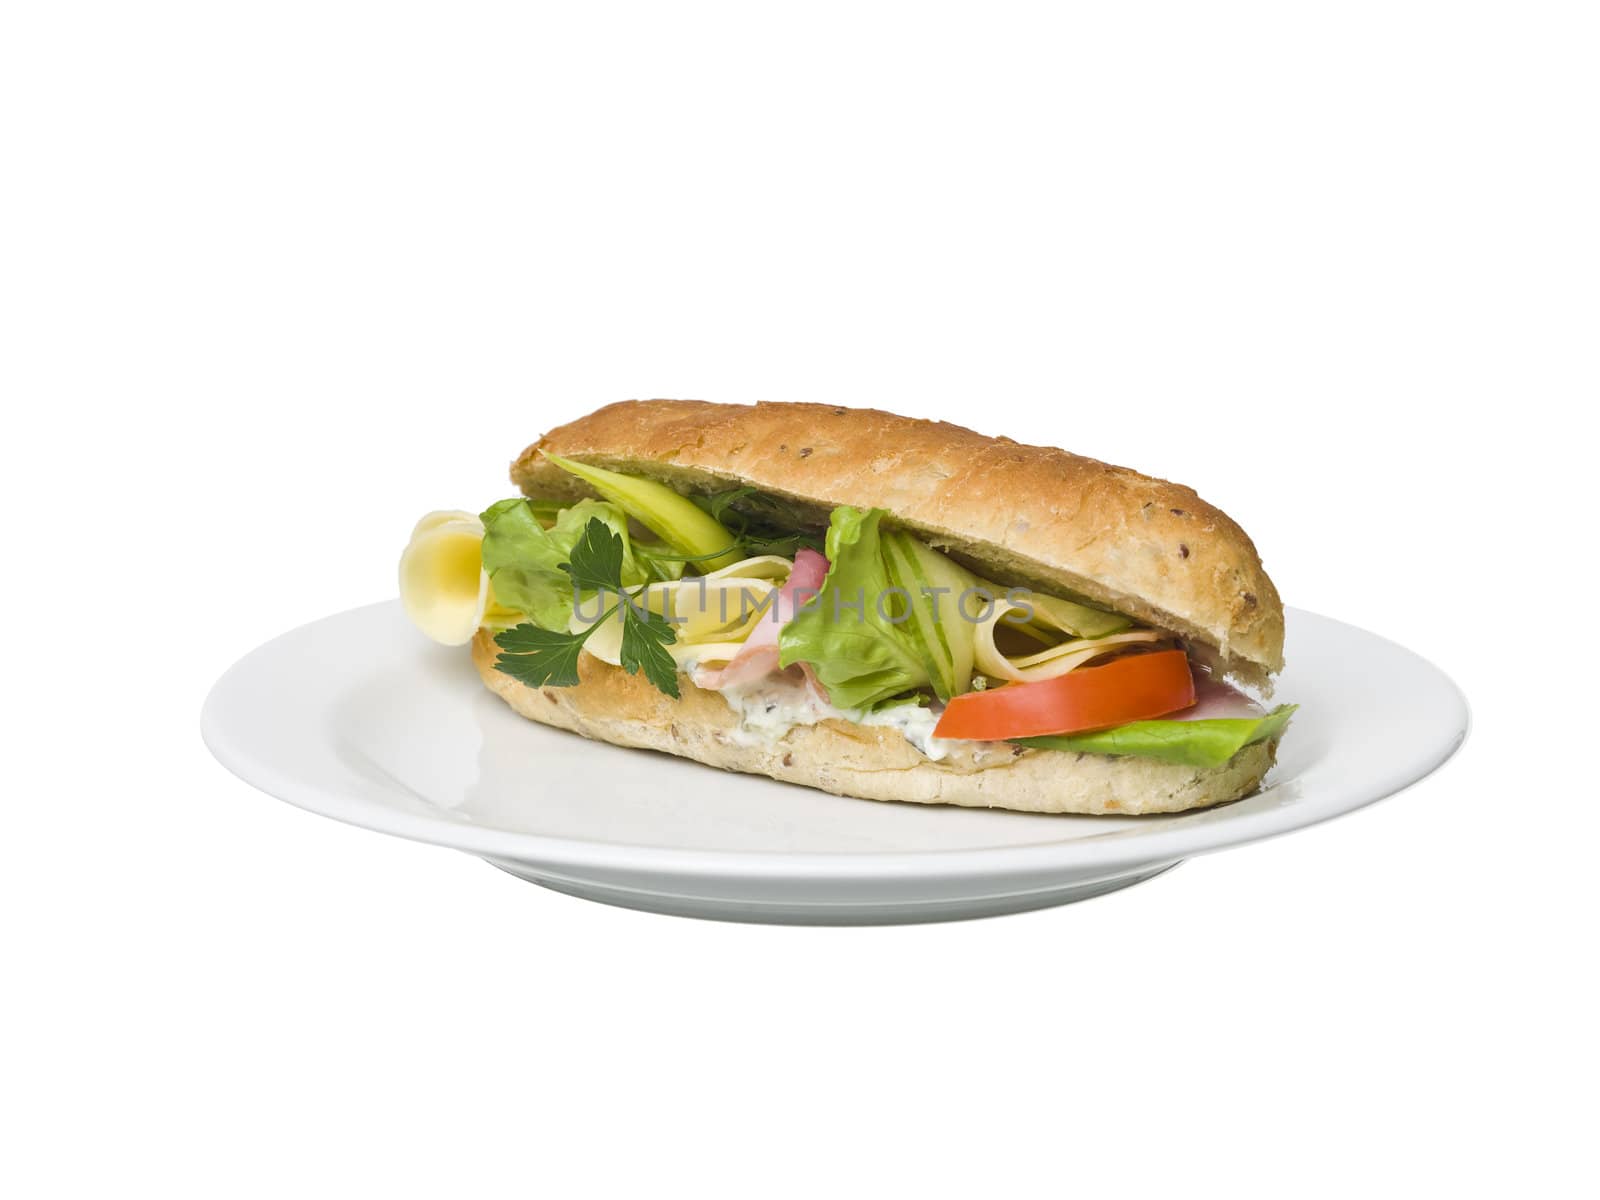 Footlong sandwich on a plate isolated on white background